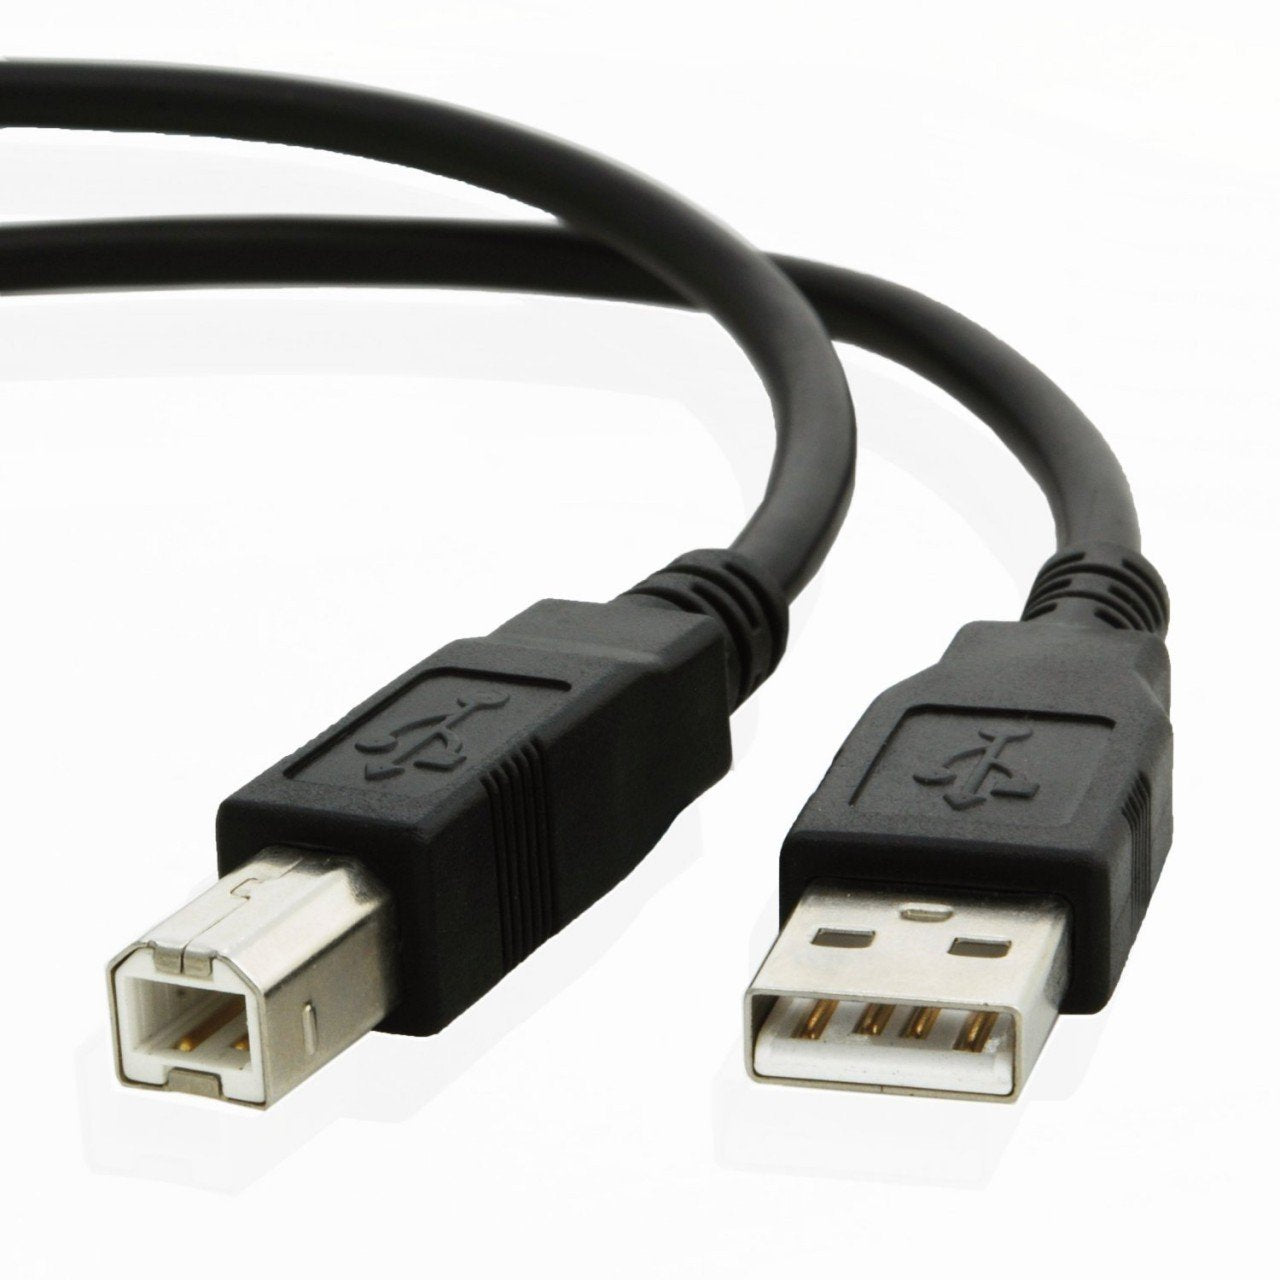 USB cable for Epson EXPRESSION 12000XL